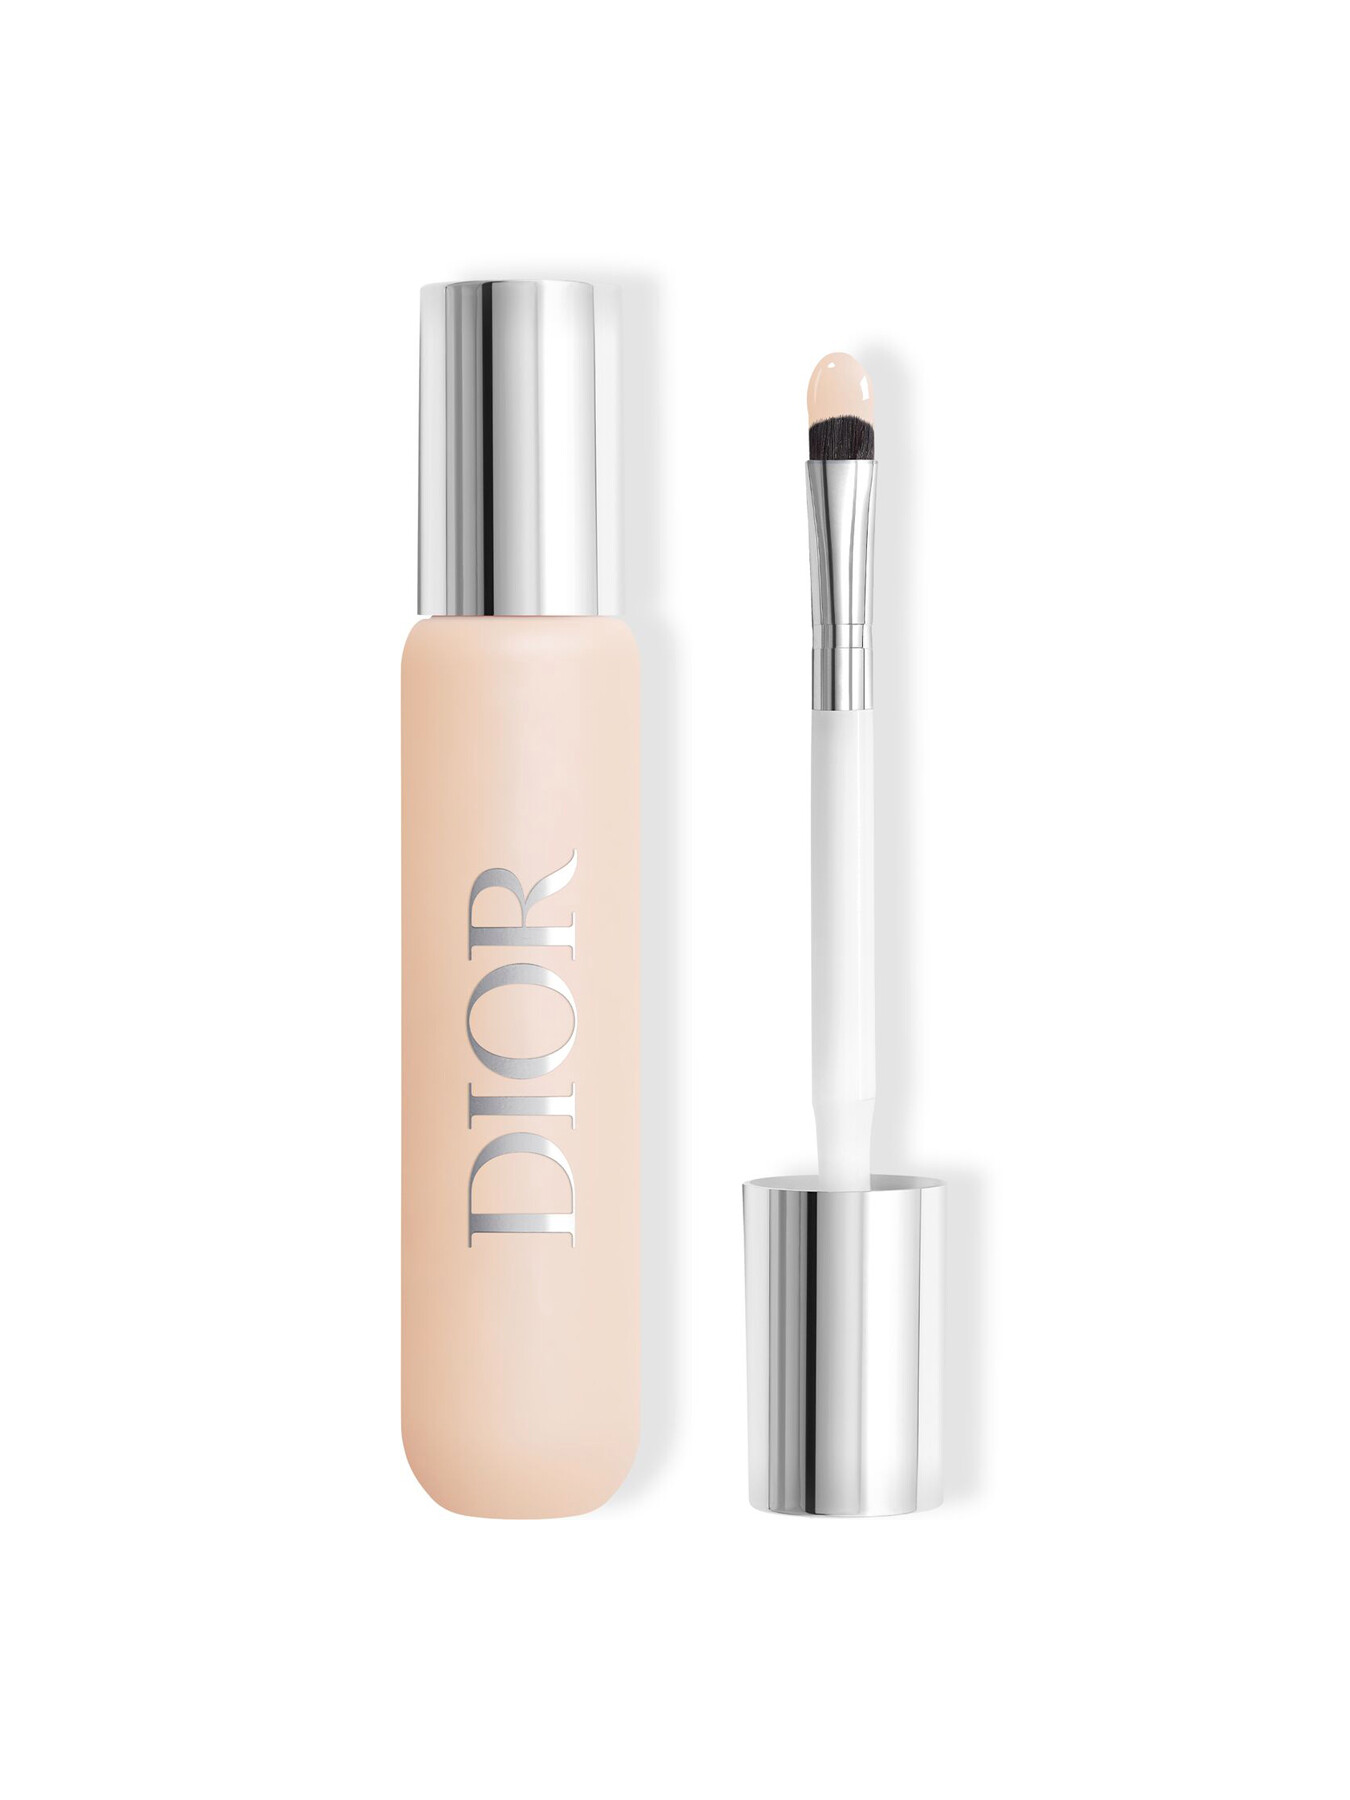 Dior Backstage Flash Perfector Concealer In White